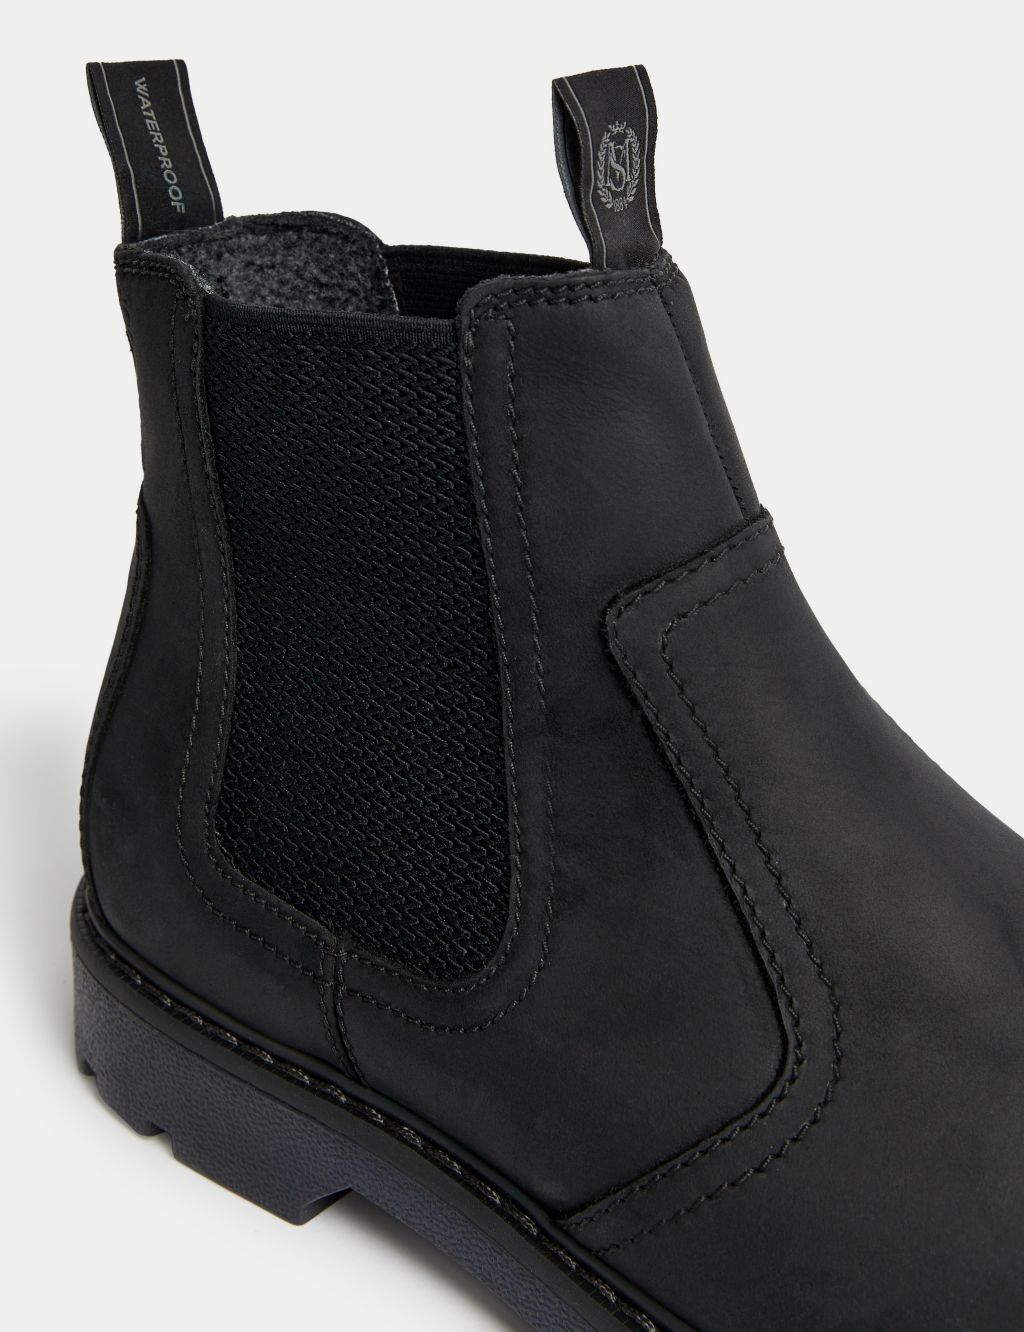 Leather Waterproof Chelsea Boots image 3